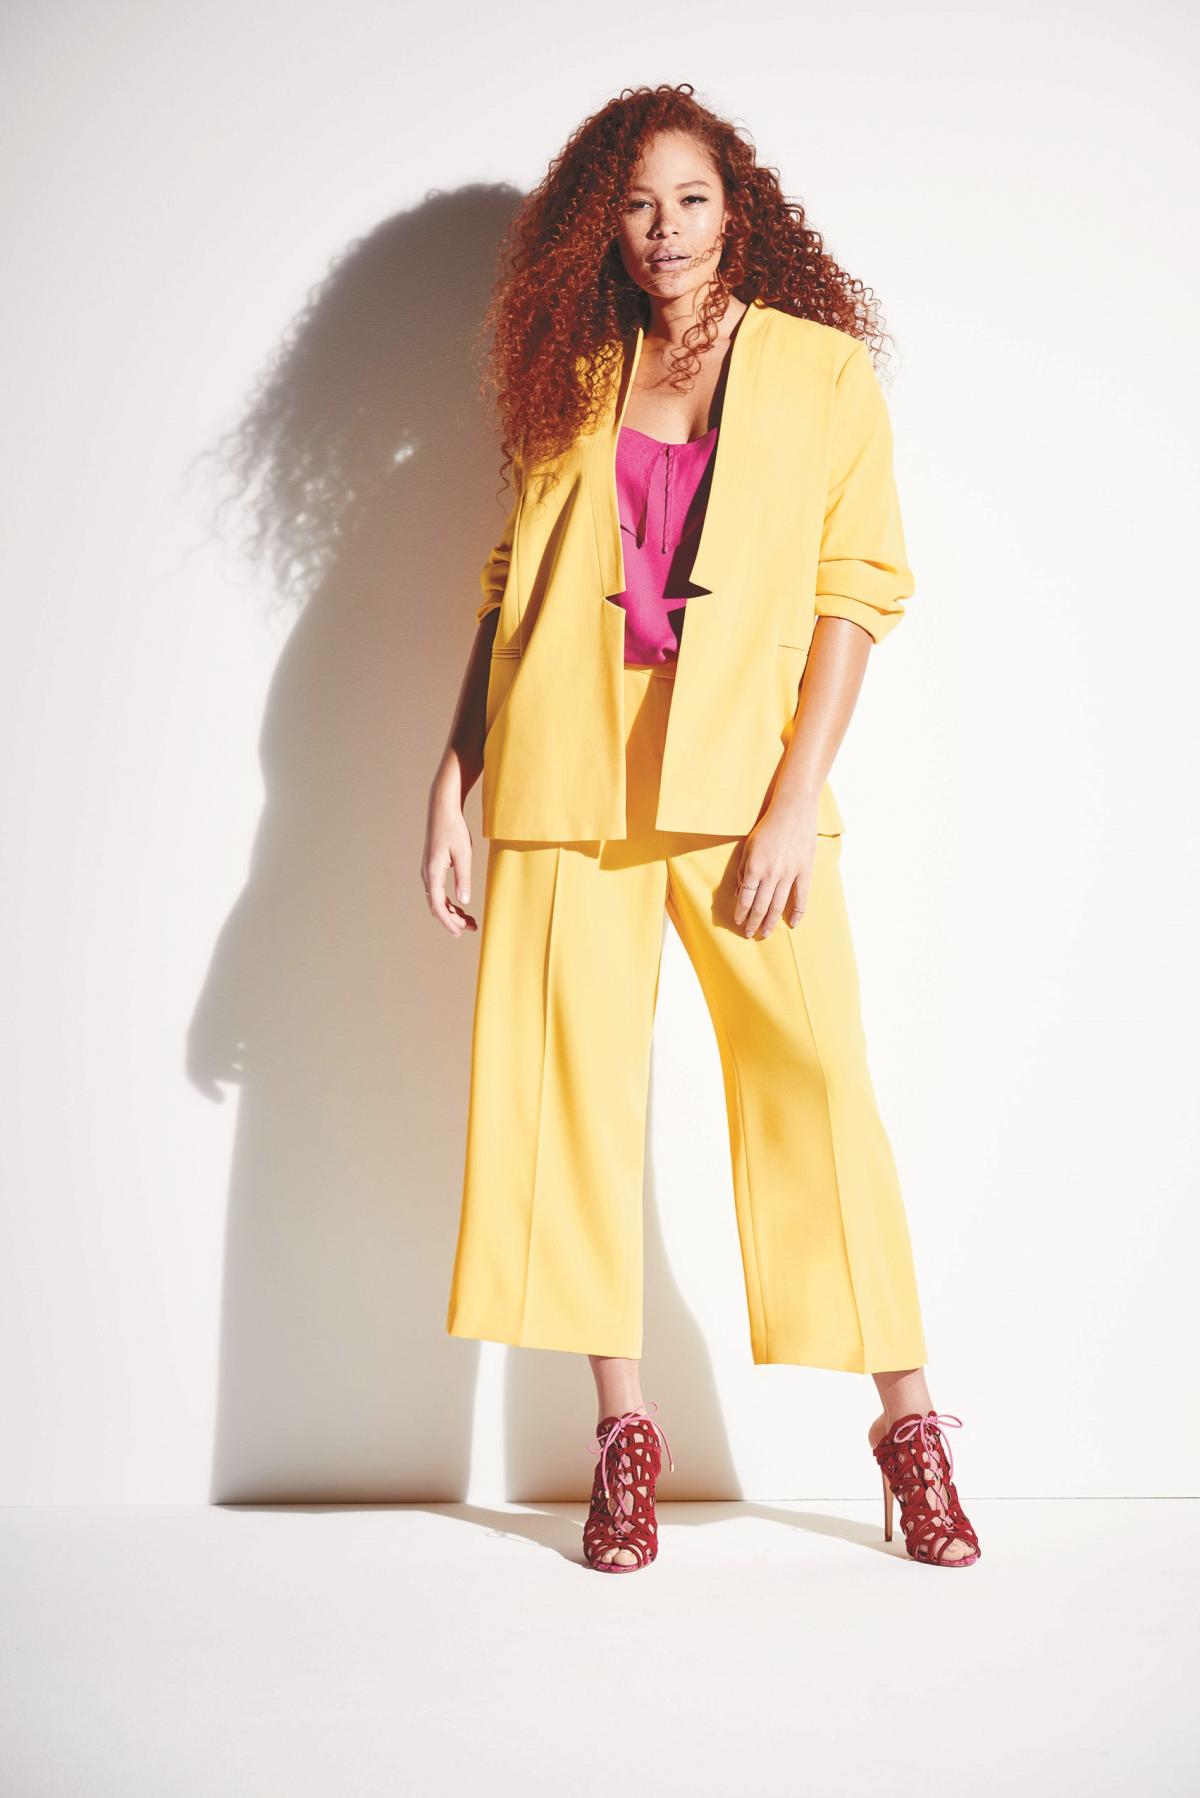 If you don't think yellow is your colour then clash with those that are. (River Island)